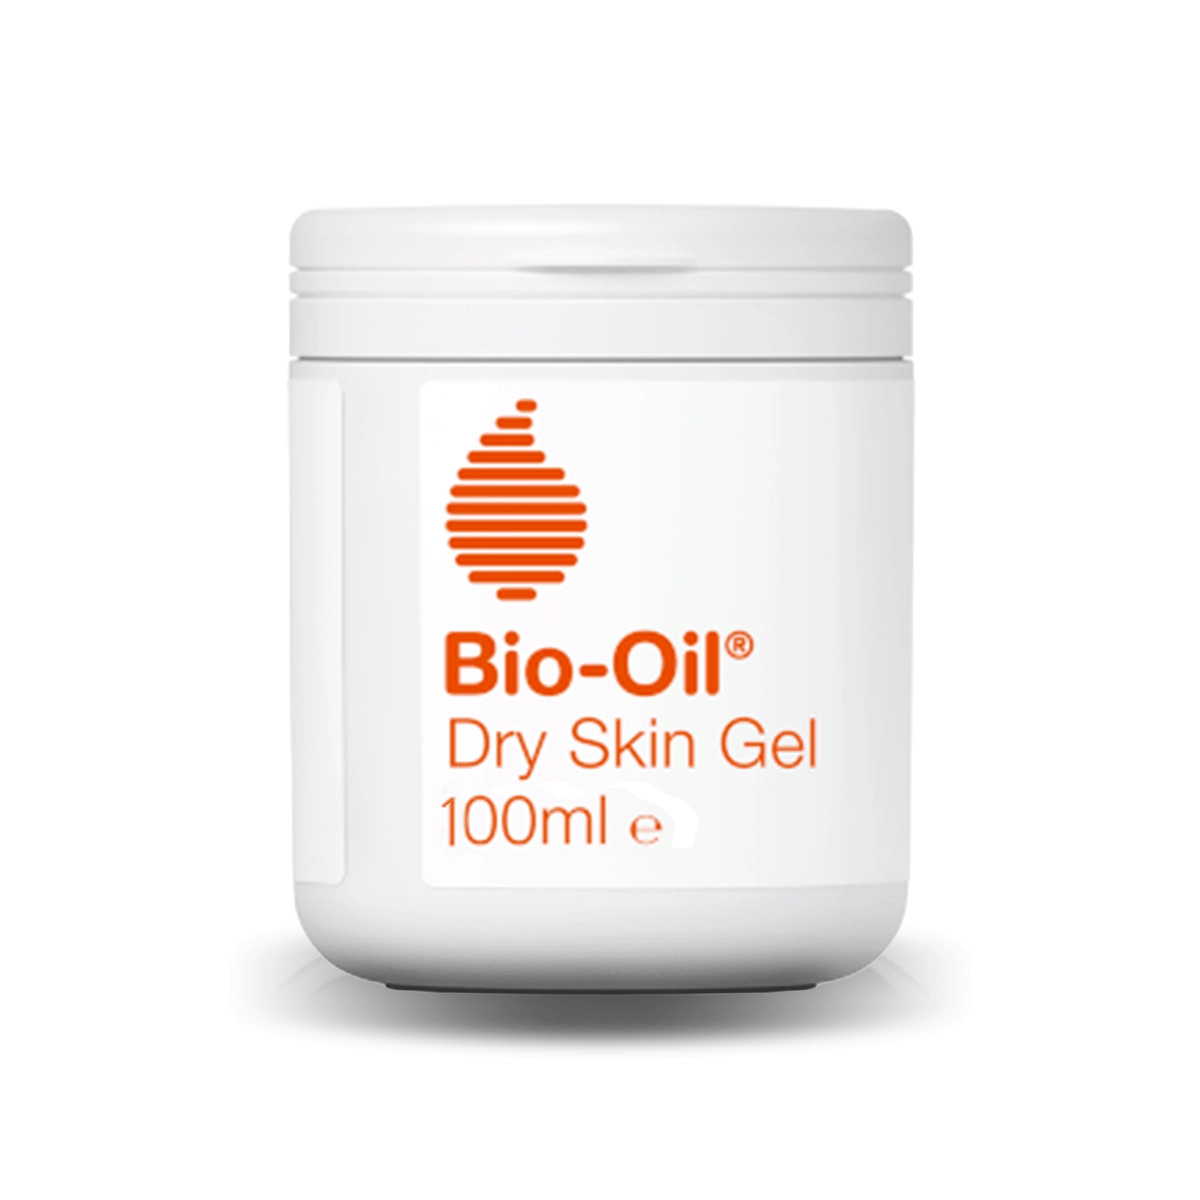 First product image of Bio-Oil Dry Skin Gel 100ml